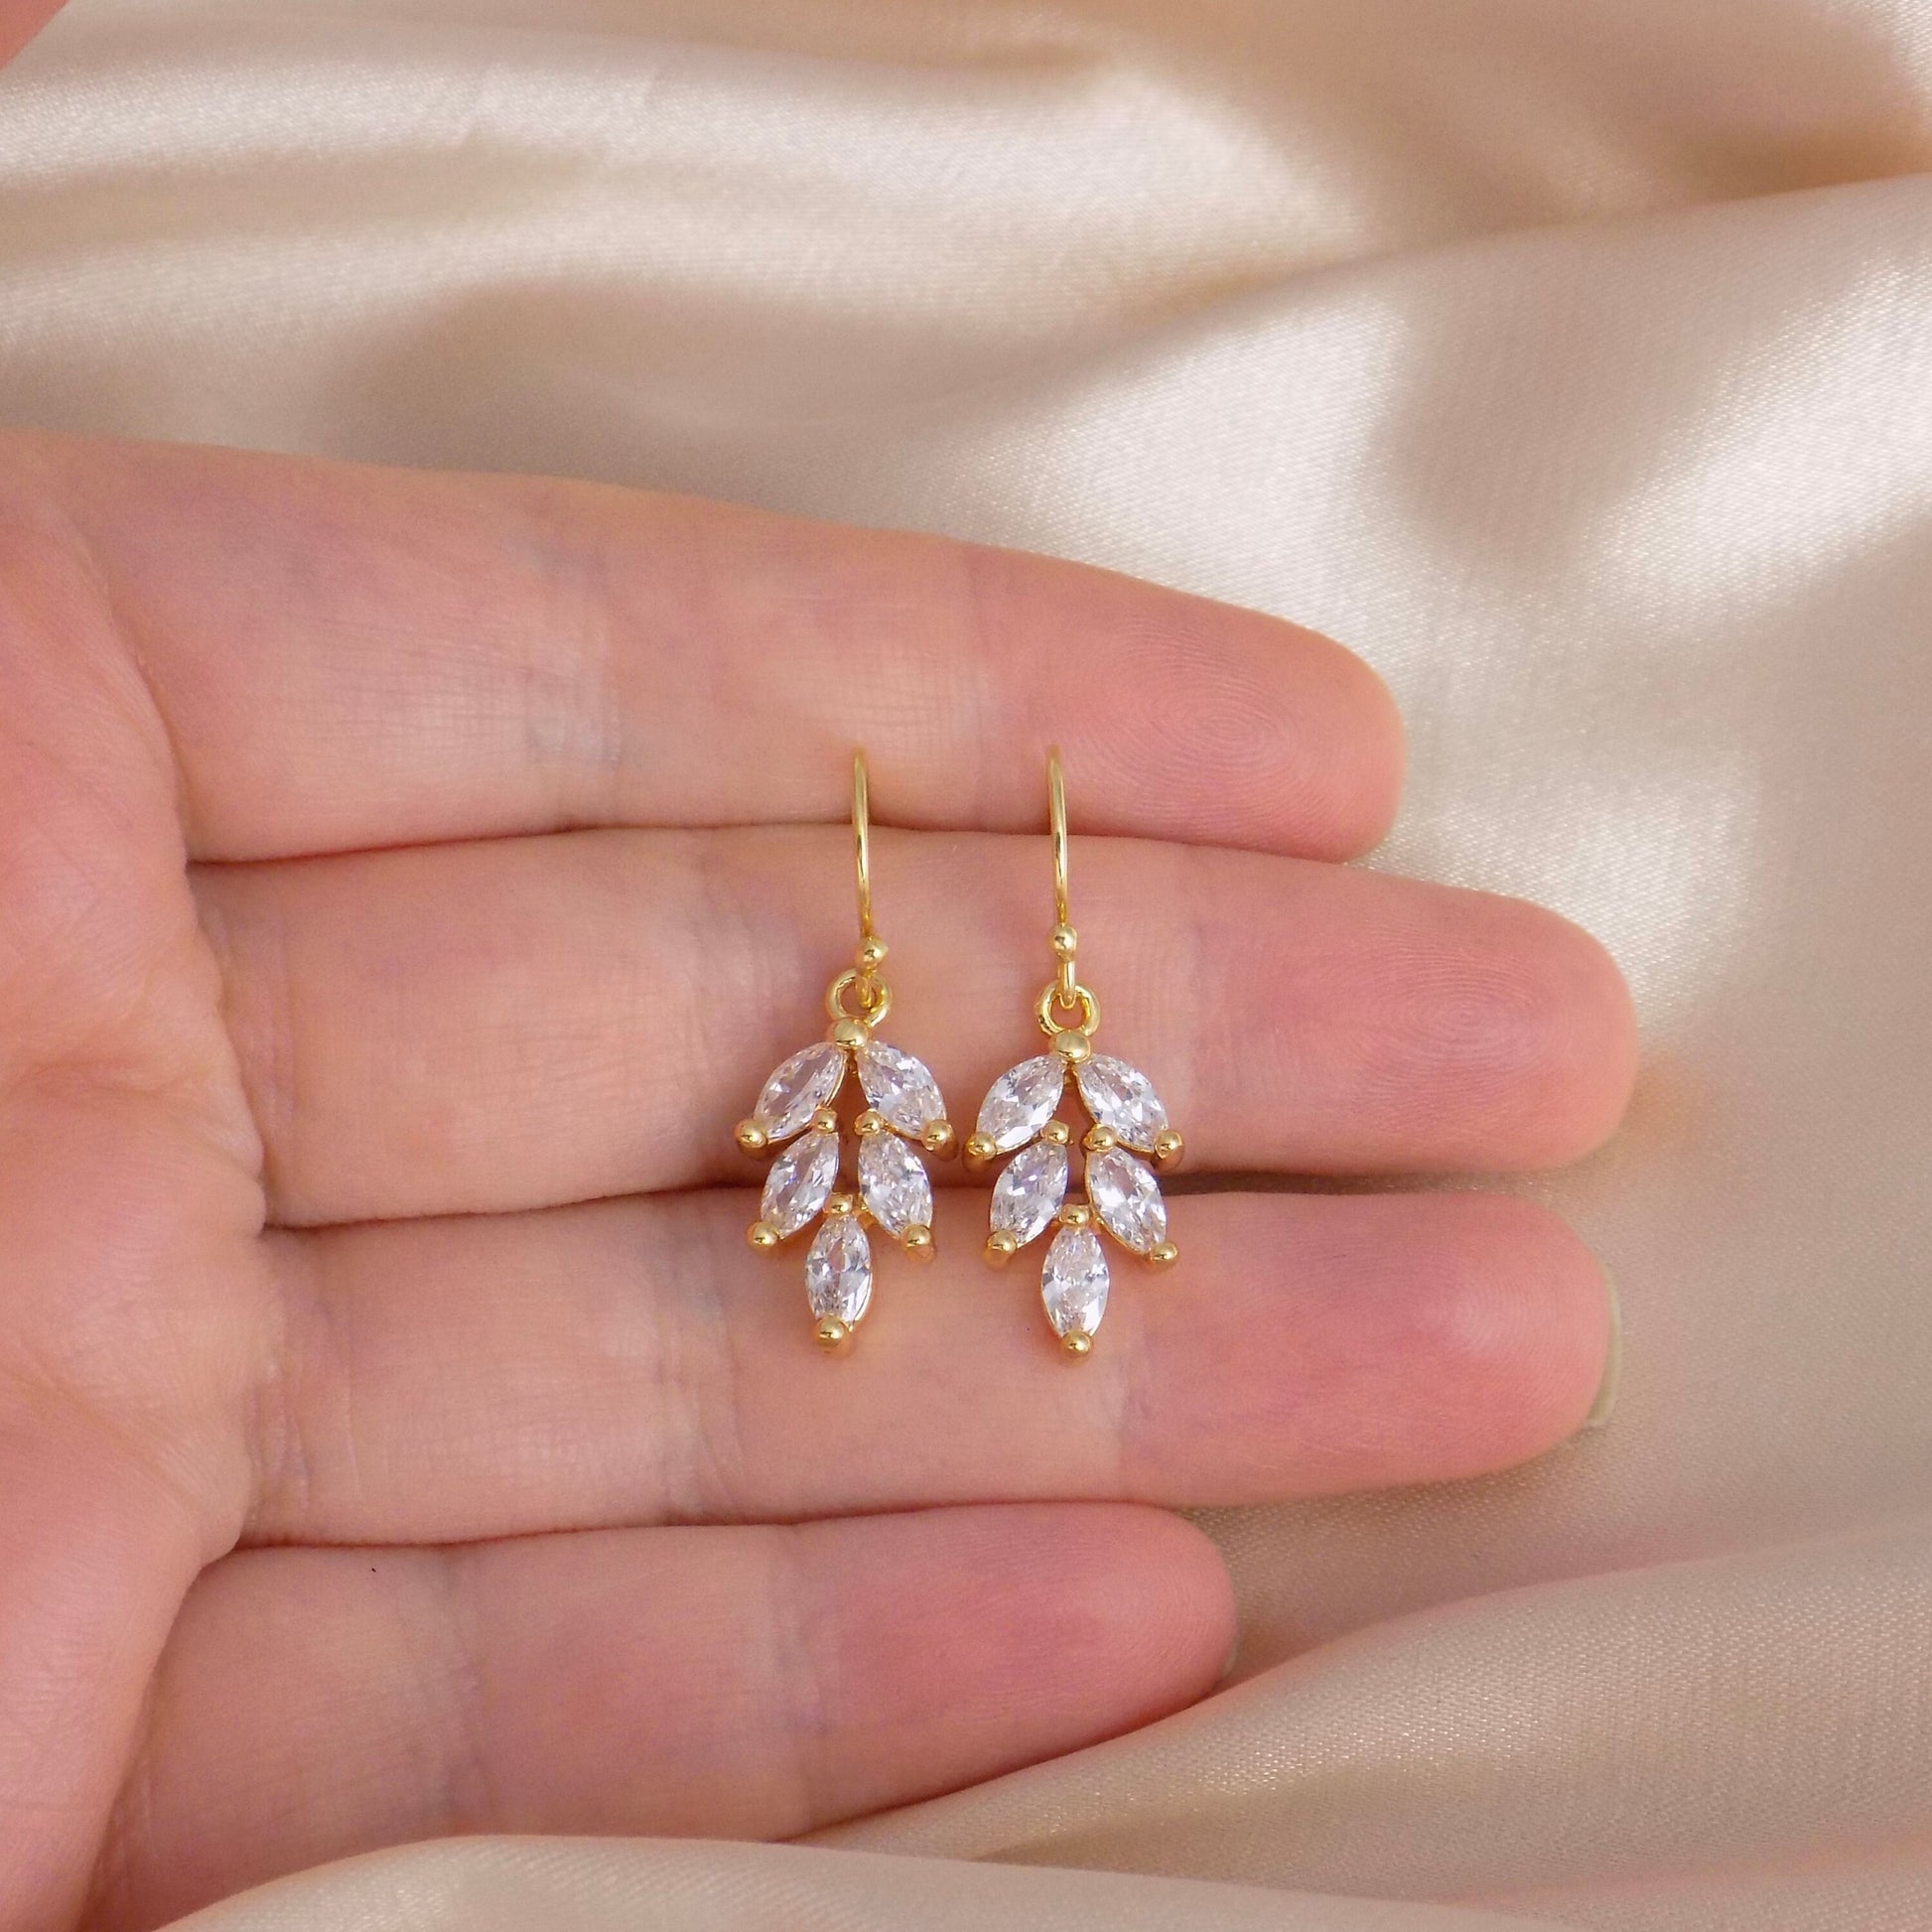 Bridal Earrings, Clear Crystal Sparkly Drop Earrings Gold, Dainty Crystal Dangle, Gifts For Her, M7-42